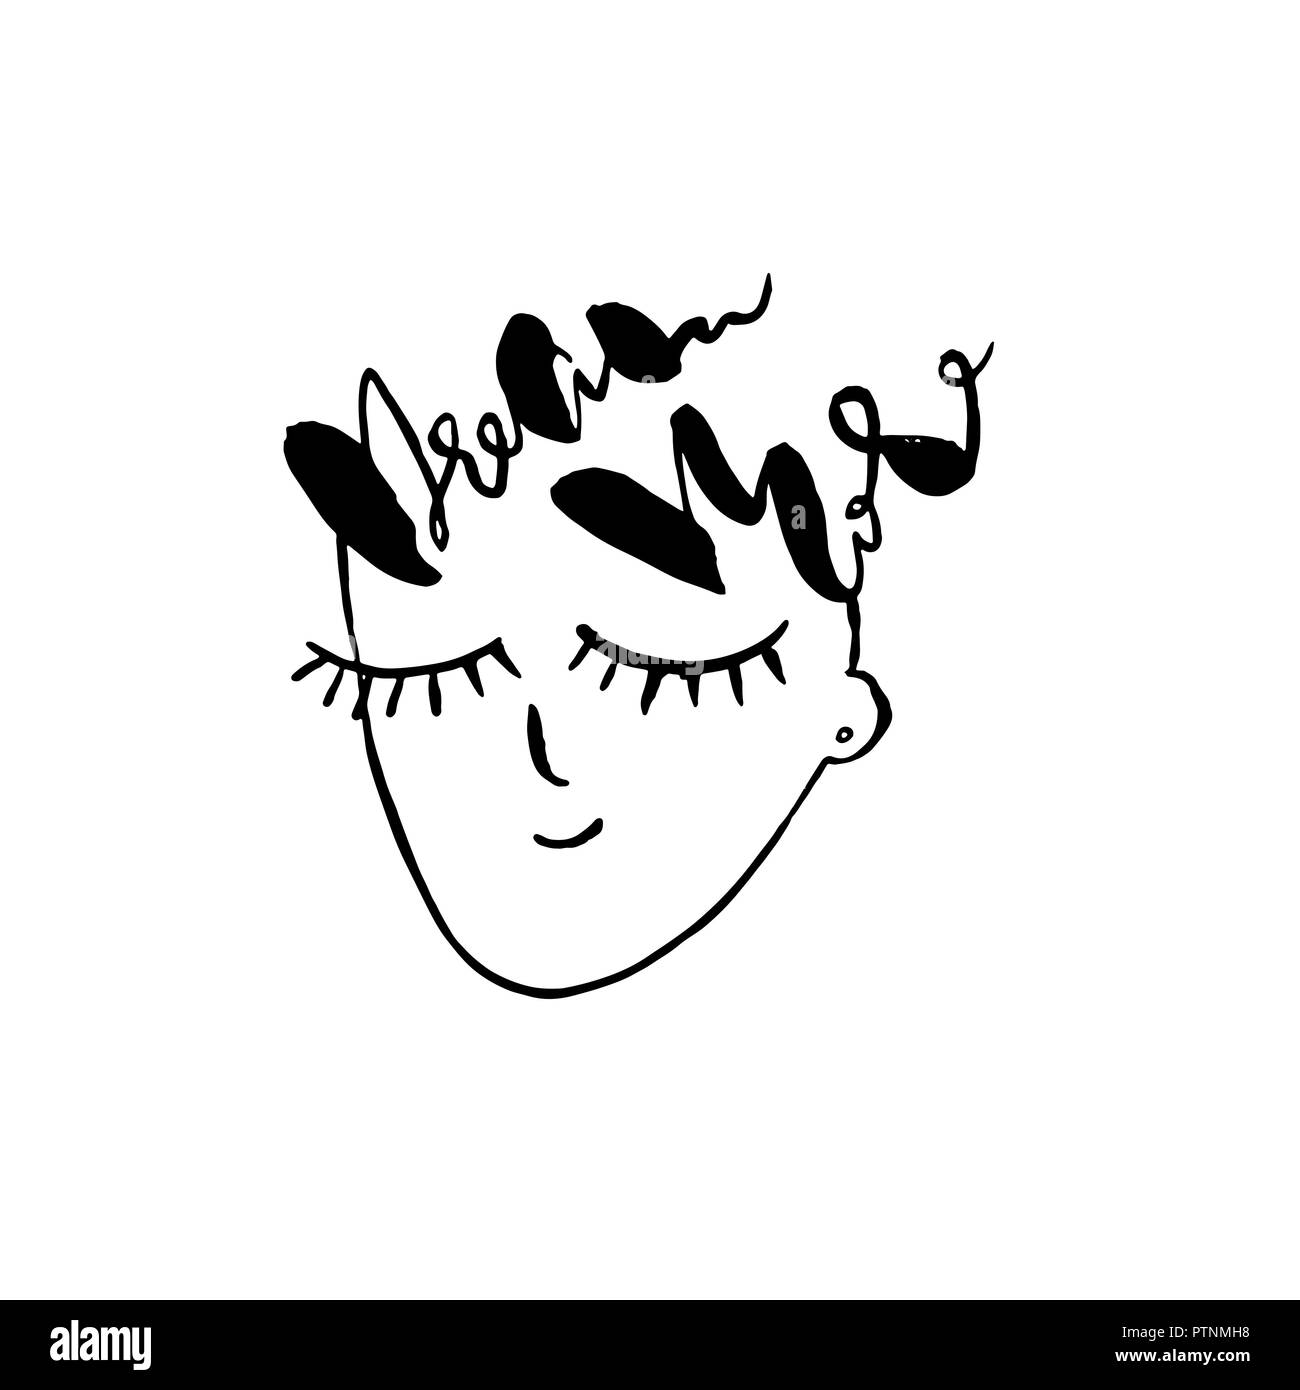 Dream more. Lettering poster with face. Close eyes. Hand drawn art work. Vector illustration. Stock Vector